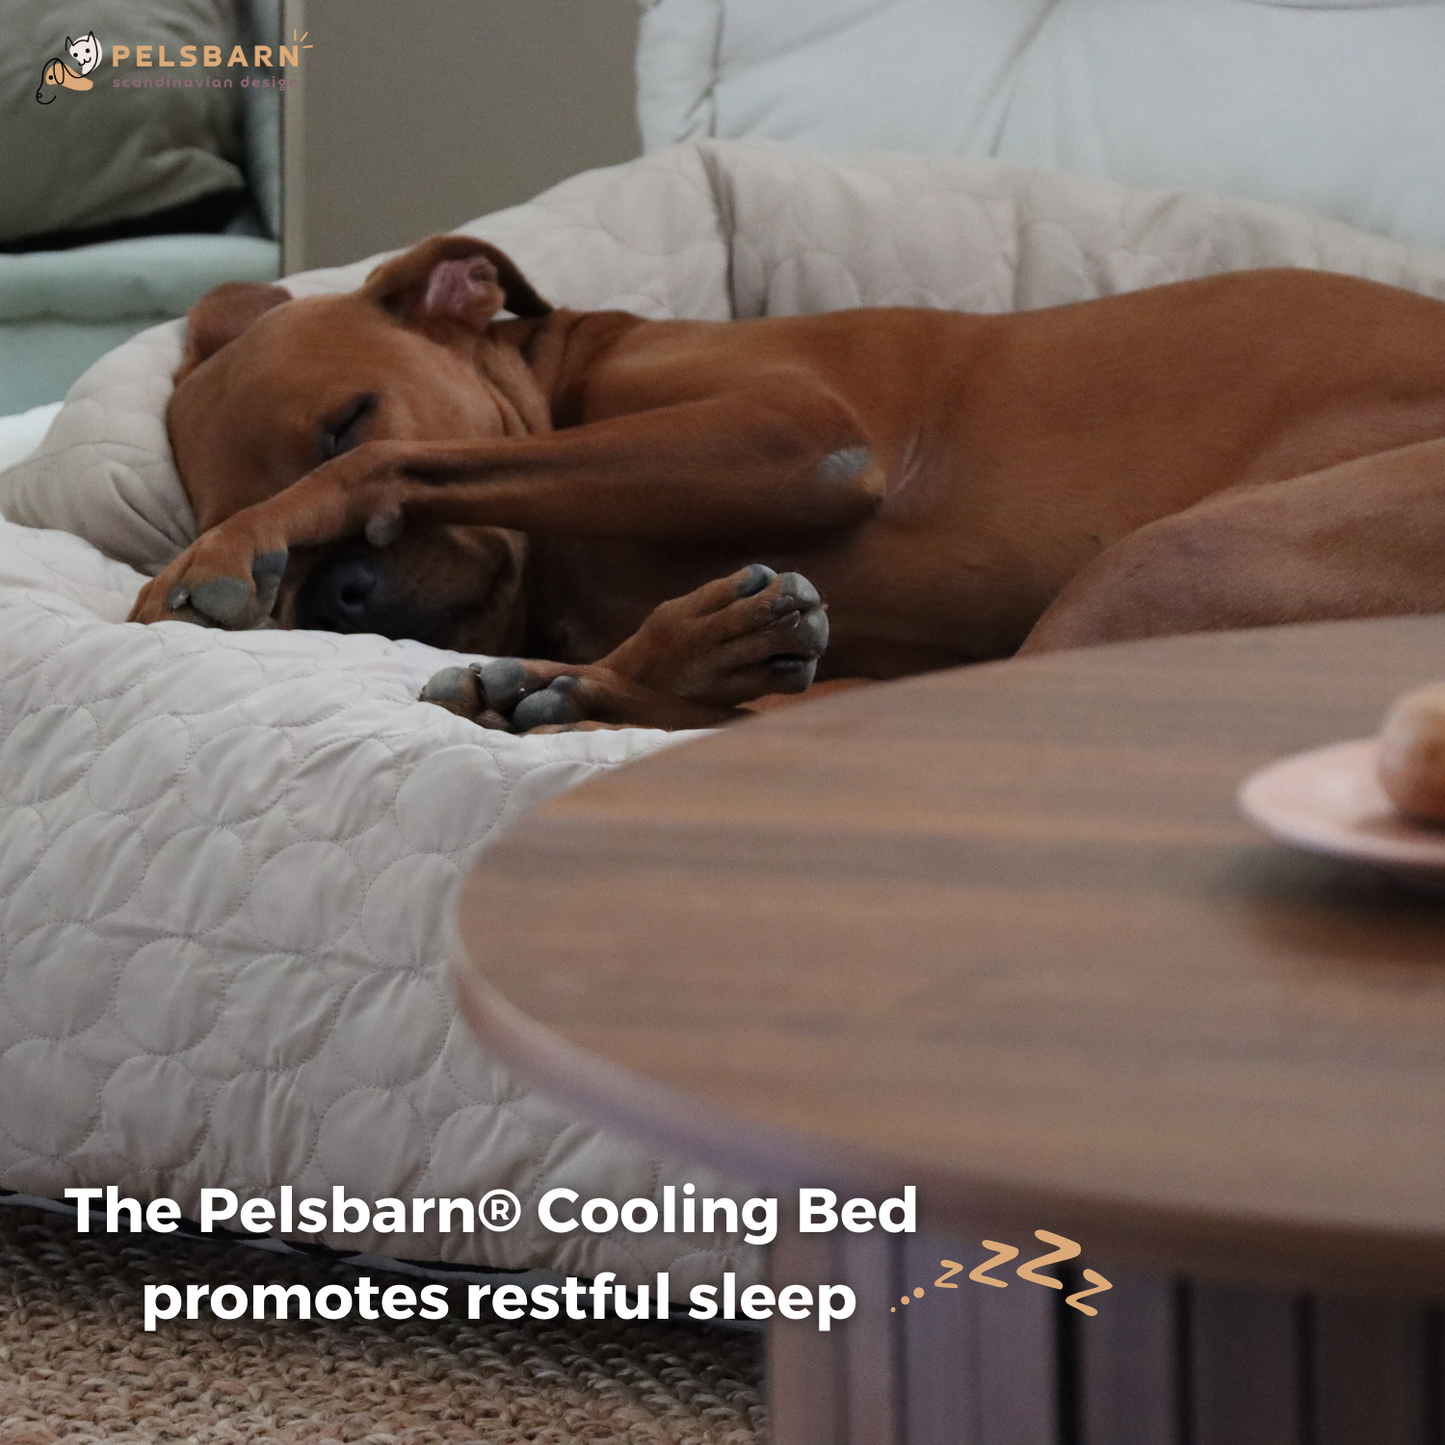 Pelsbarn Cooling Bed (4x more effective)